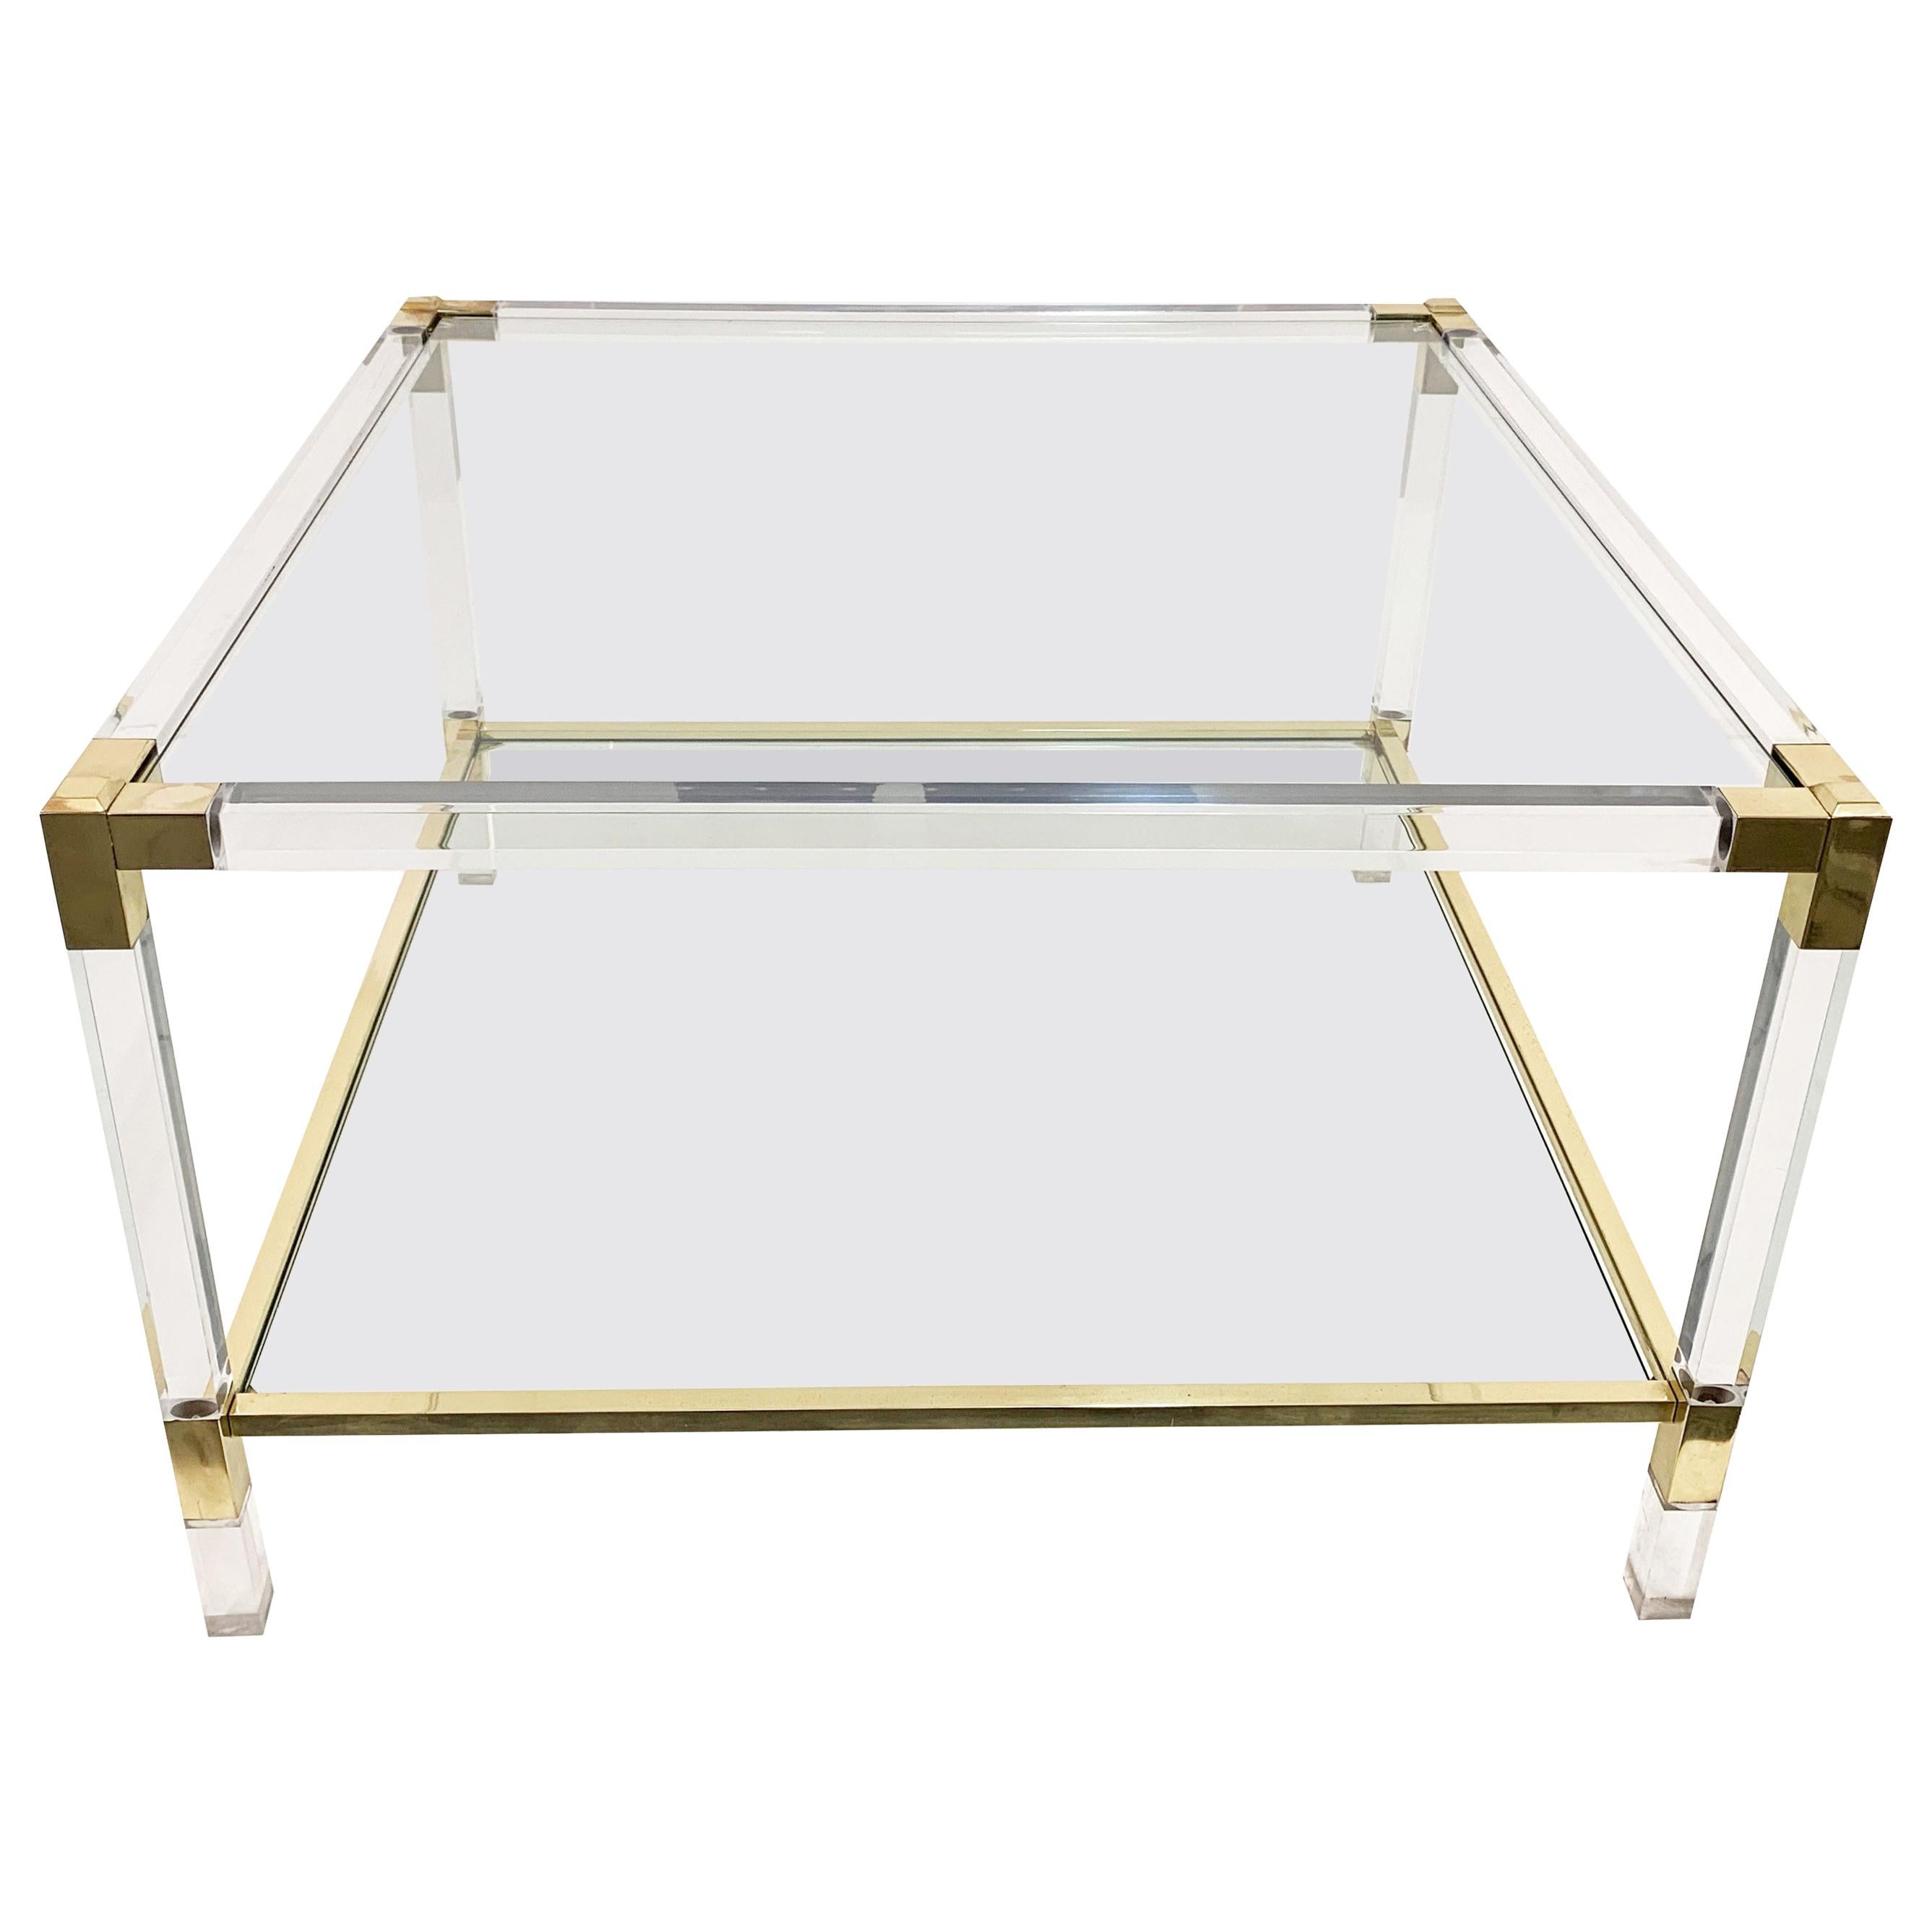 Charles Hollis Jones Plexiglass and Brass Italian Square Cocktail Table, 1970s For Sale